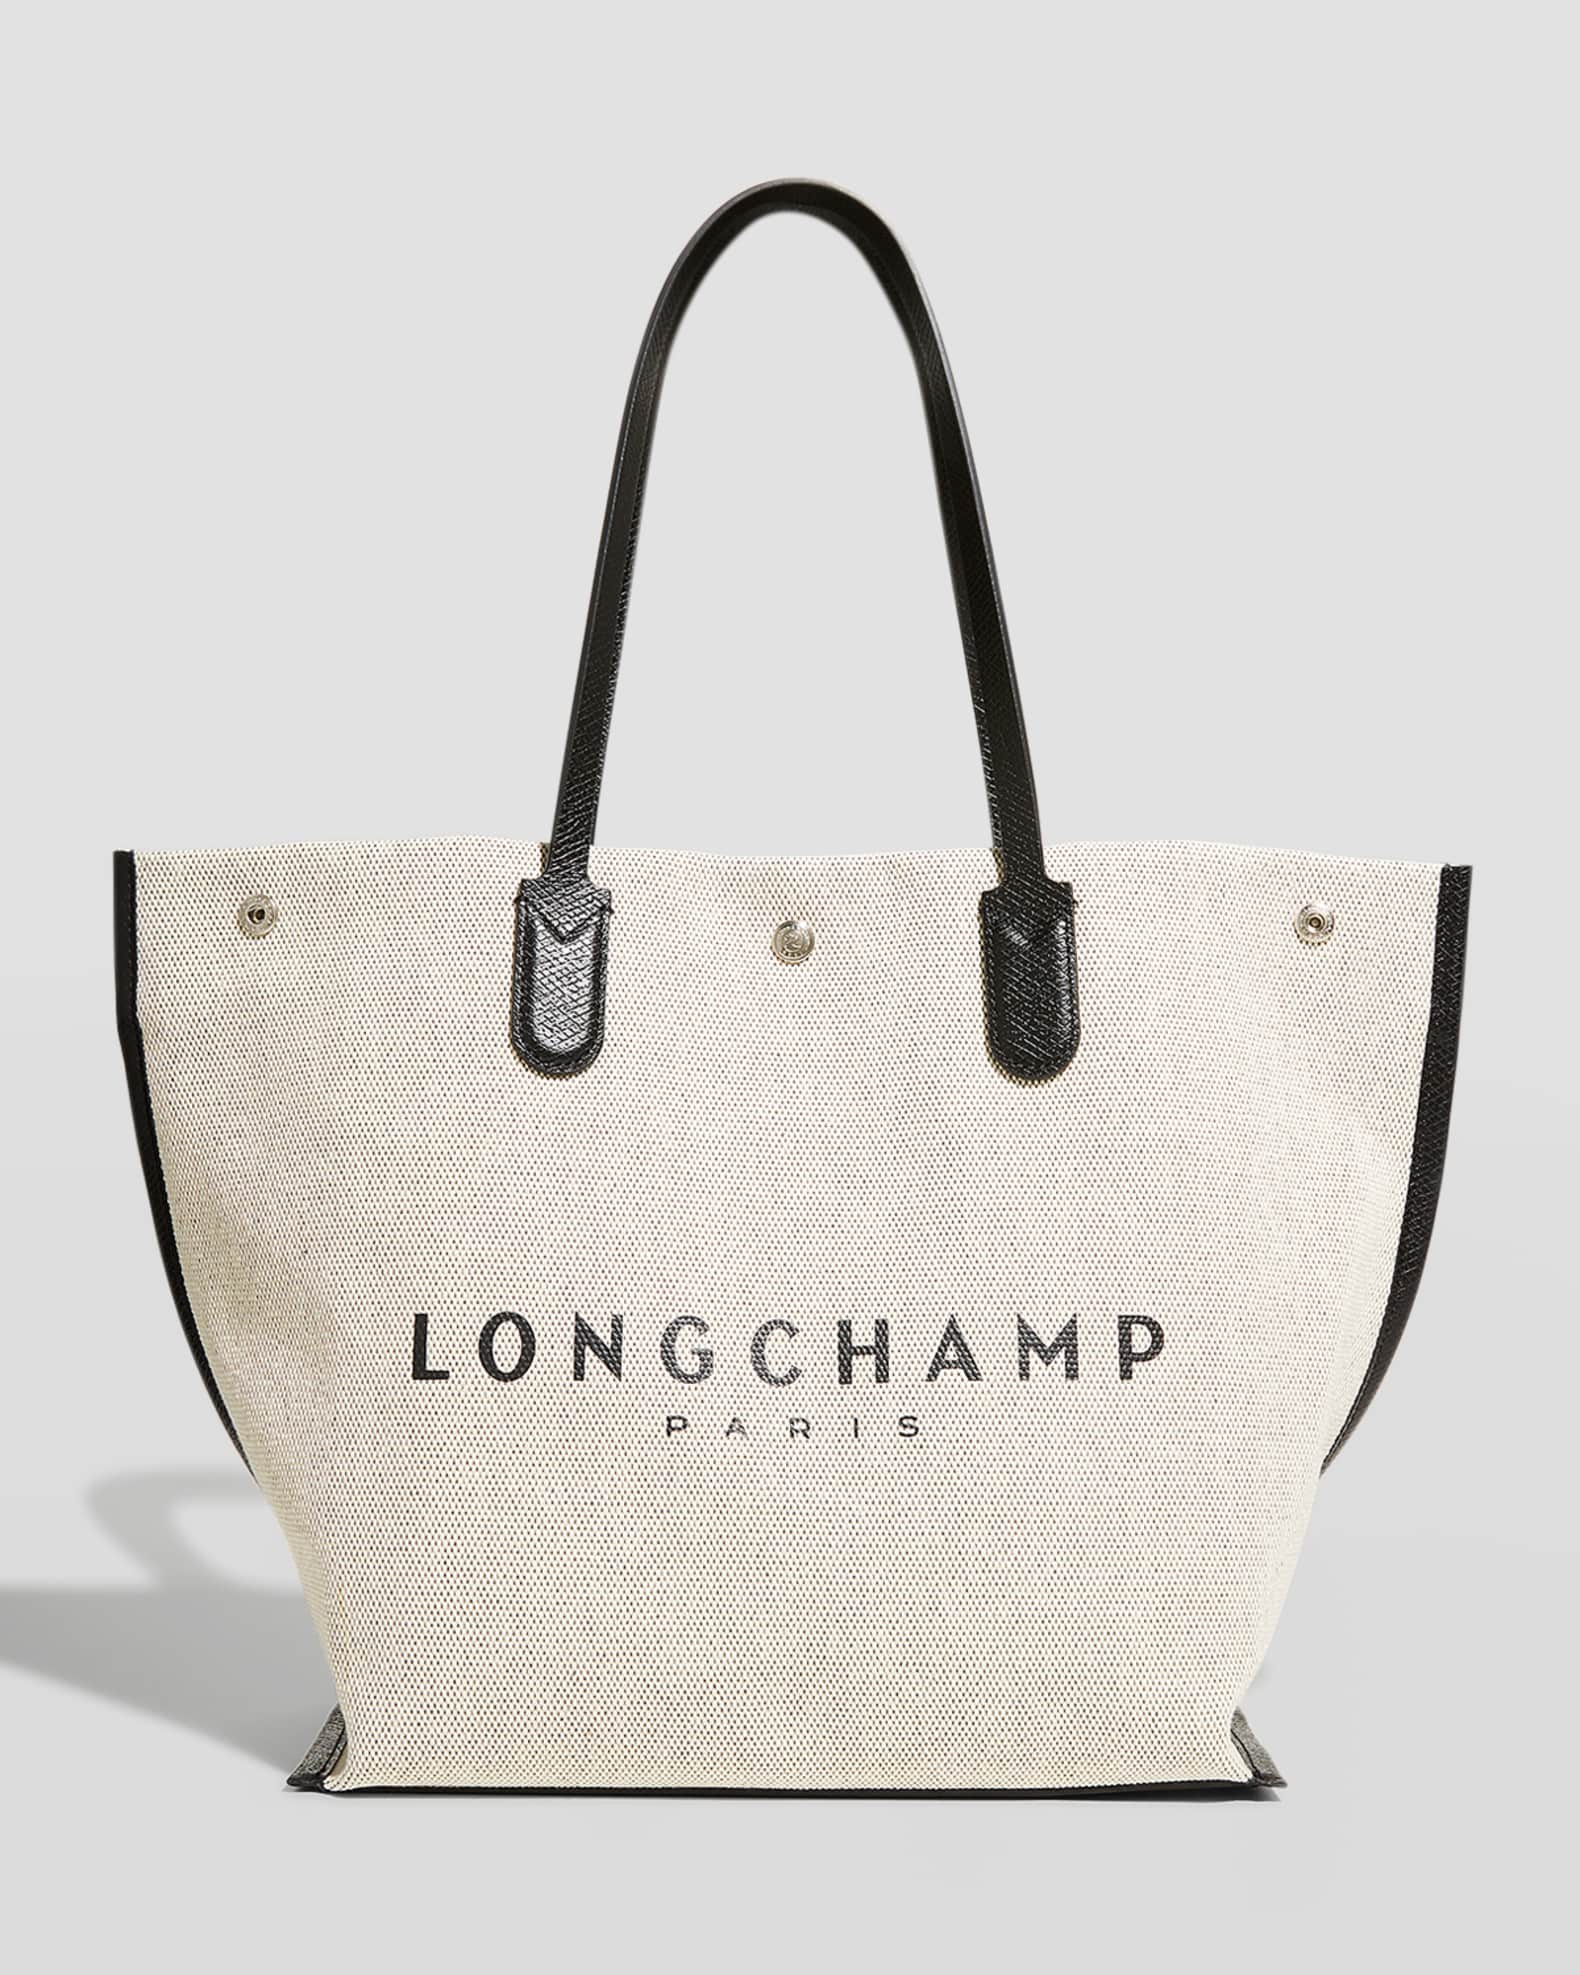 WOMEN'S BAGS BY COLLECTION WOMEN'S-BAGS-BY-COLLECTION Longchamp